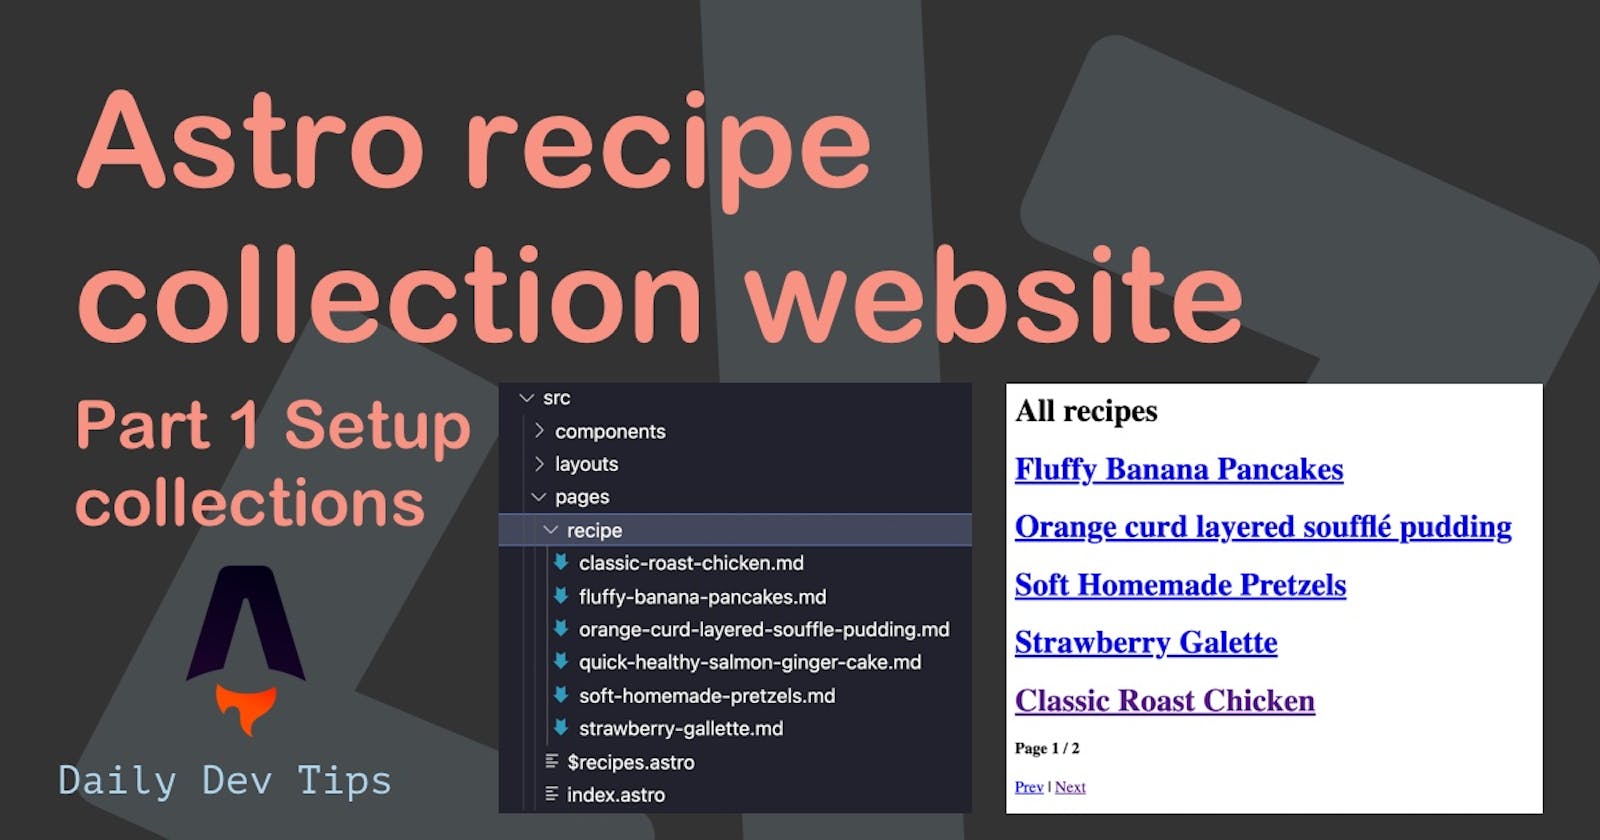 Astro recipe collection website - Part 1 Setup collections